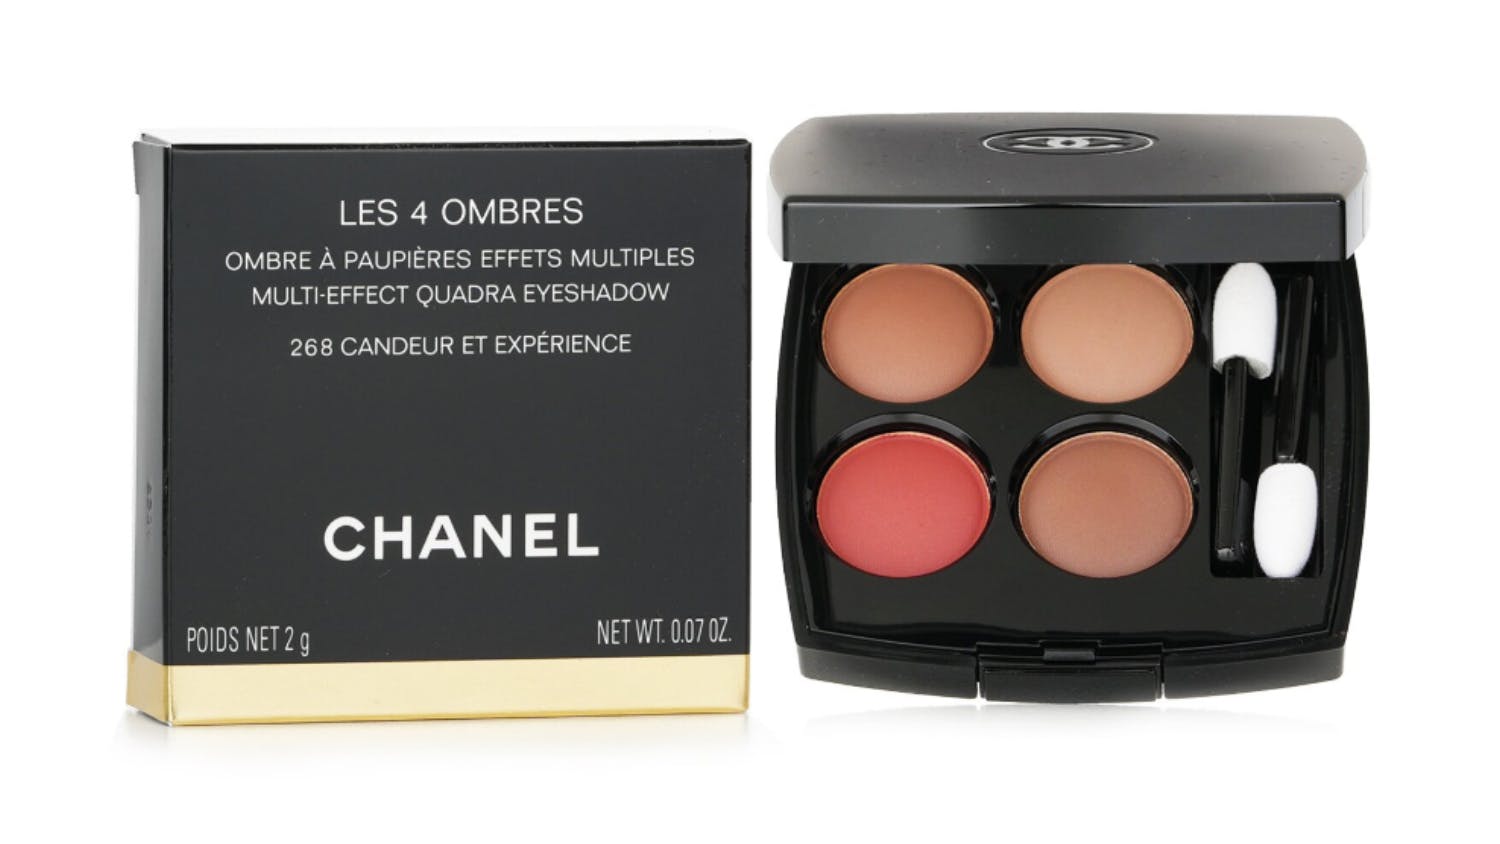 Chanel Les 4 Ombres Quadra Eye Shadow - No. 268 Candeur Et Experience - 2g/0.07oz